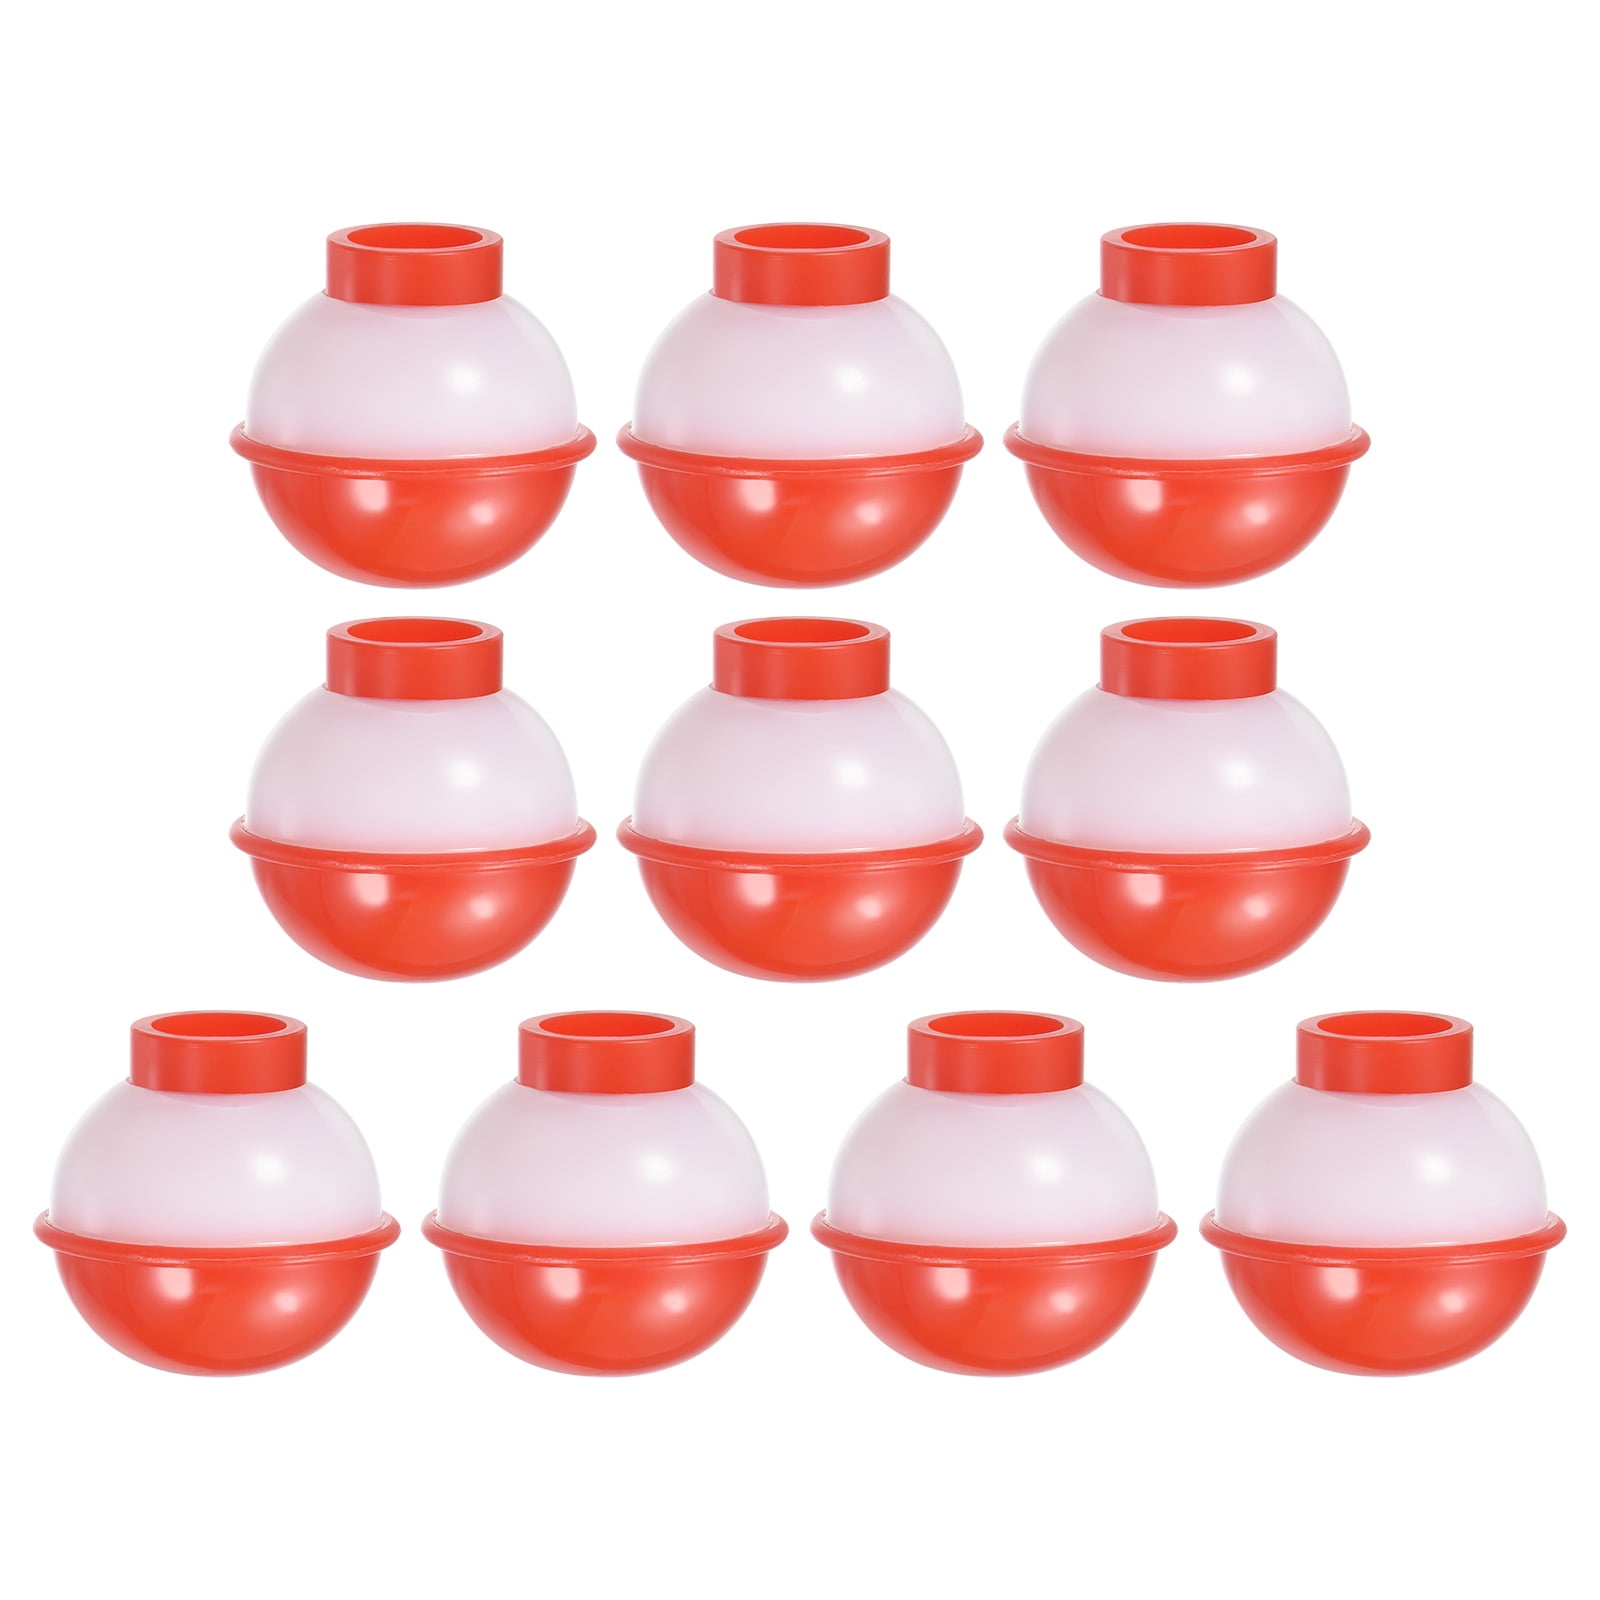  PATIKIL 1 Inch 1.5 Inch Fishing Bobber Bulk, 30 Pack Hard ABS  Push Button Round Buoy Float Bobber Tackle, Red and White : Sports &  Outdoors